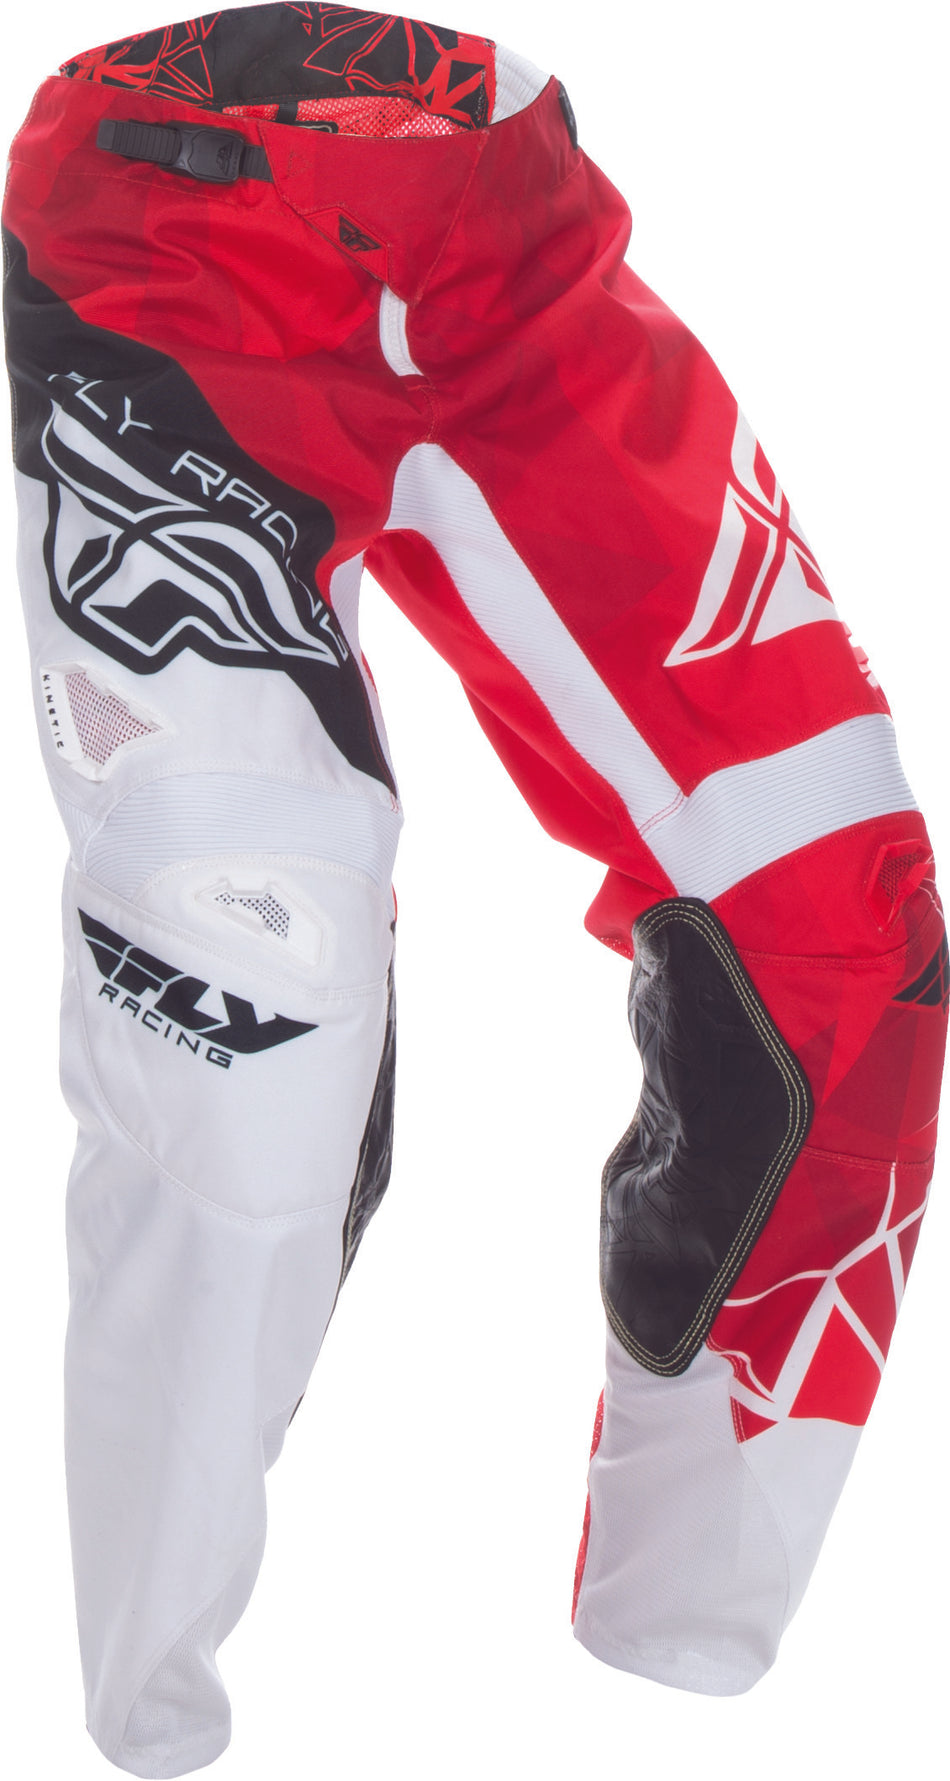 FLY RACING Kinetic Crux Pant Red/White Sz 34 370-53234